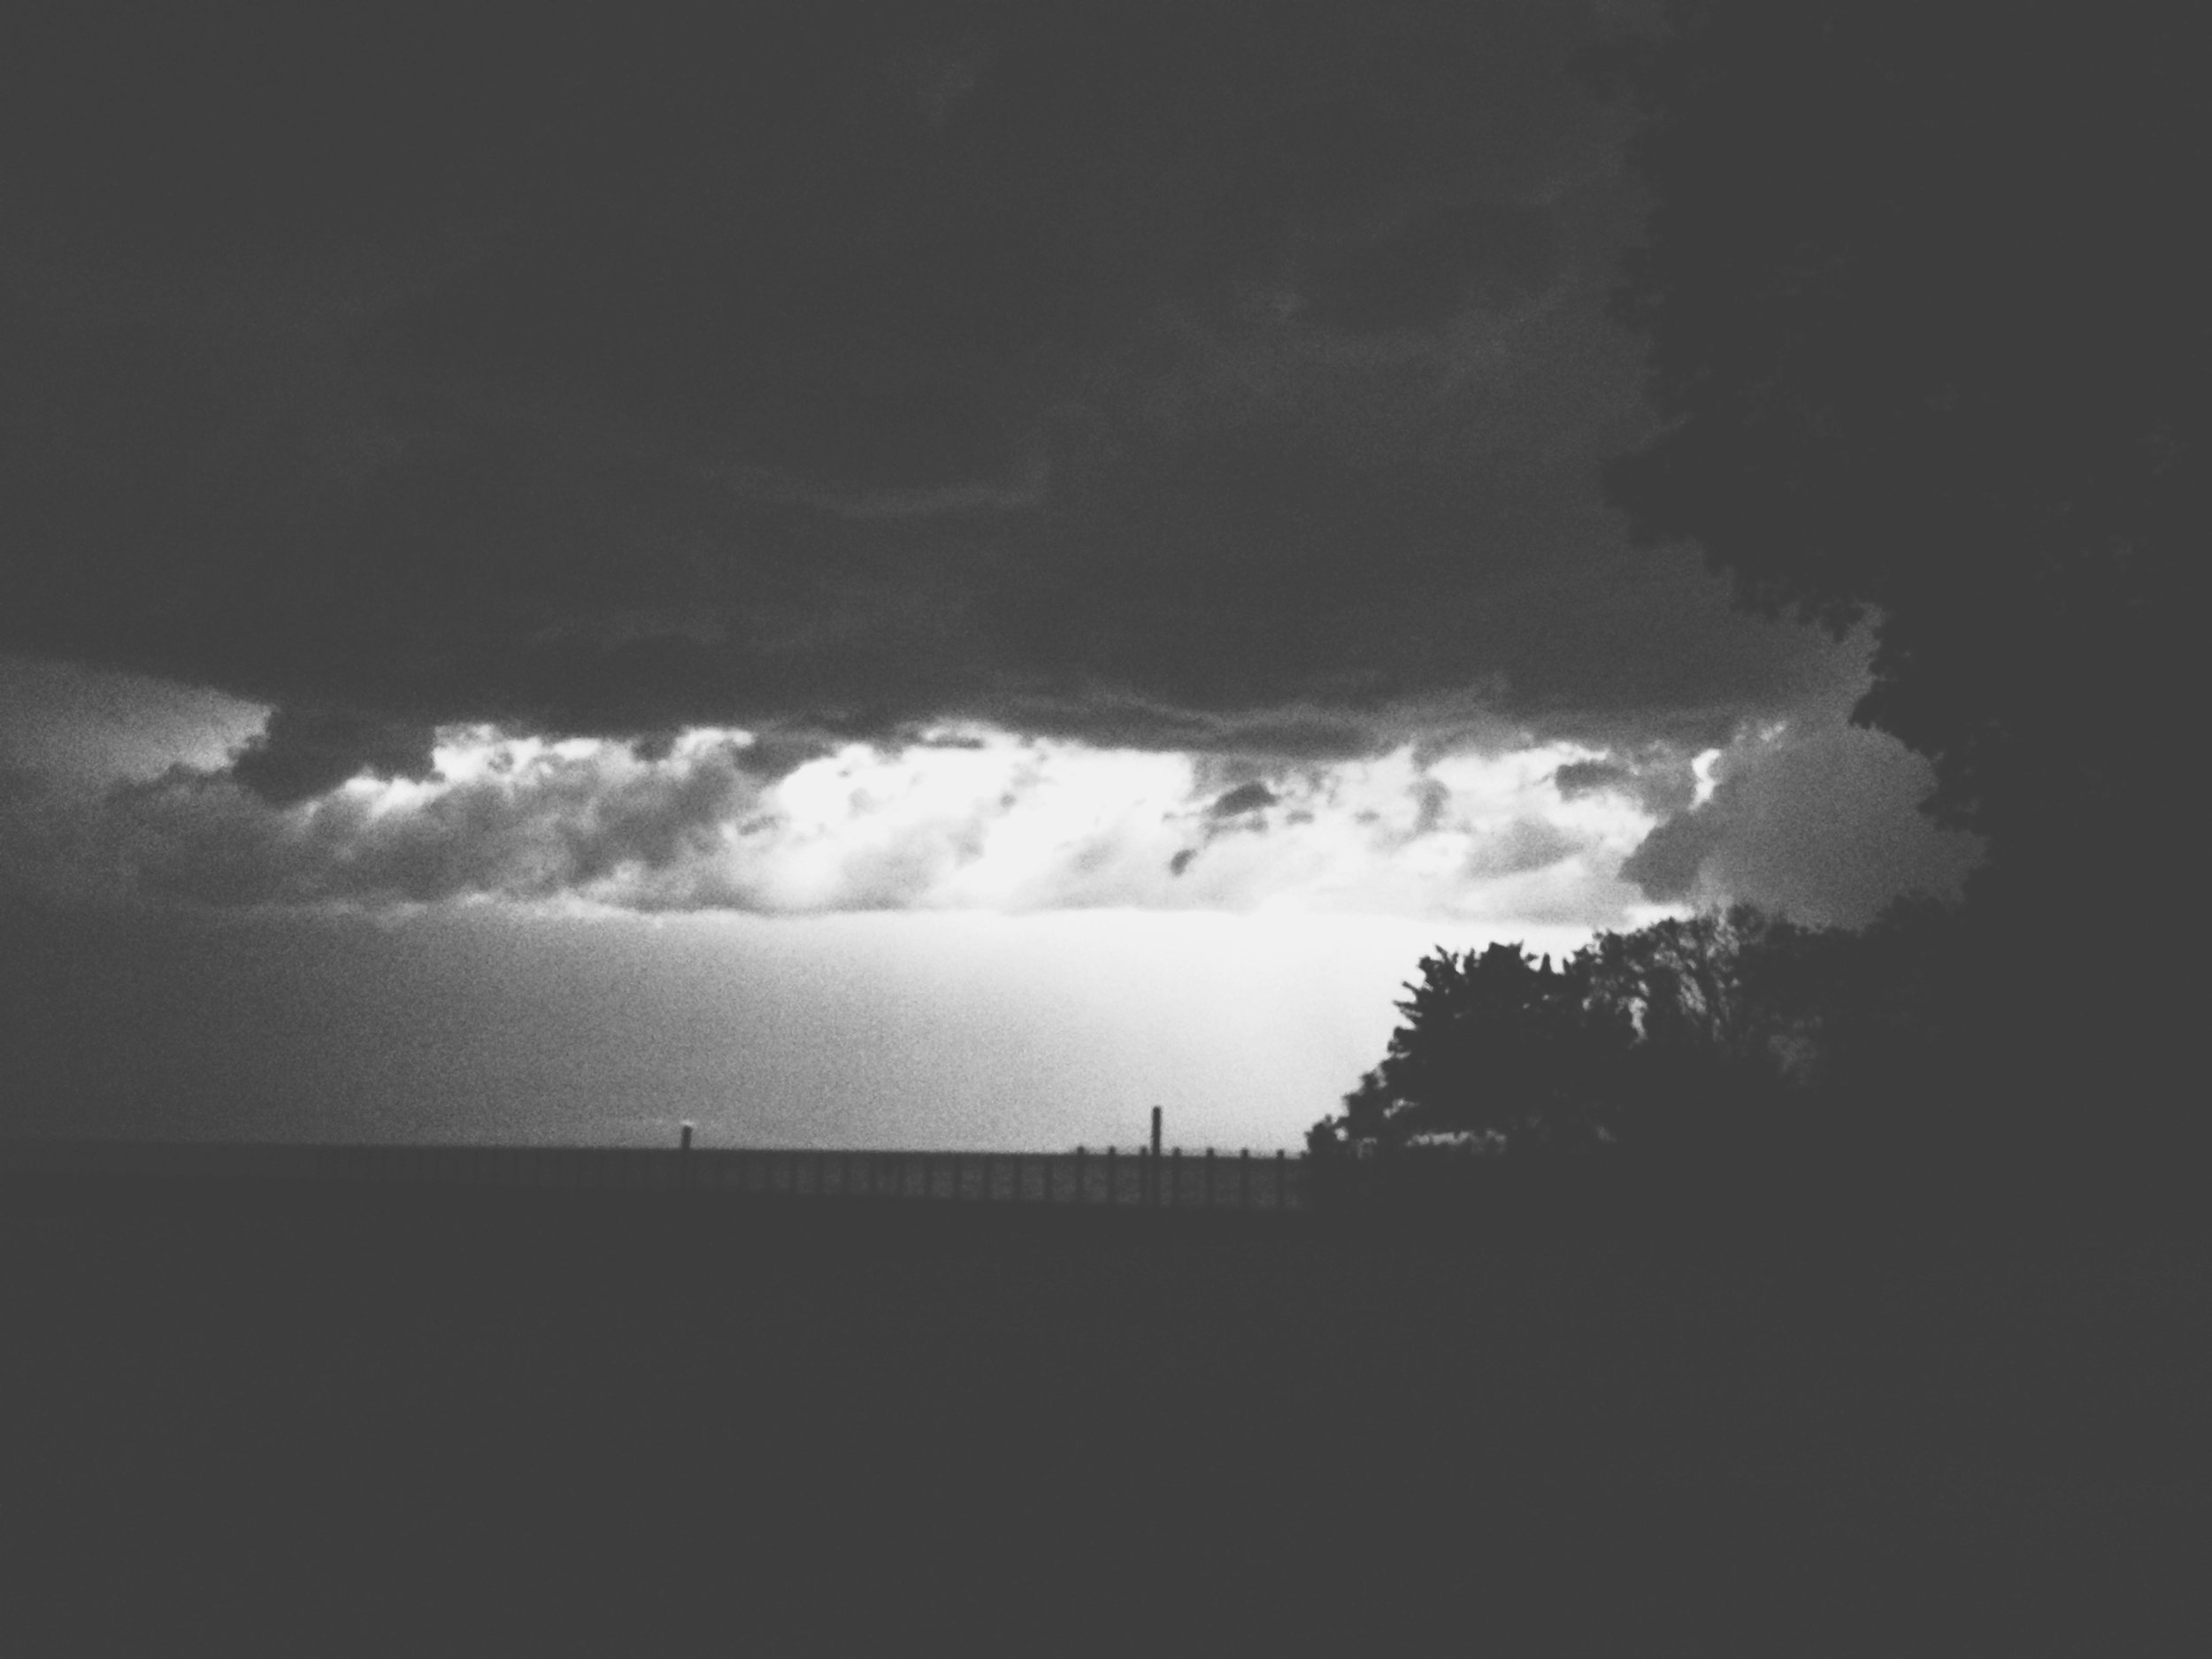 Processed with VSCOcam with x2 preset